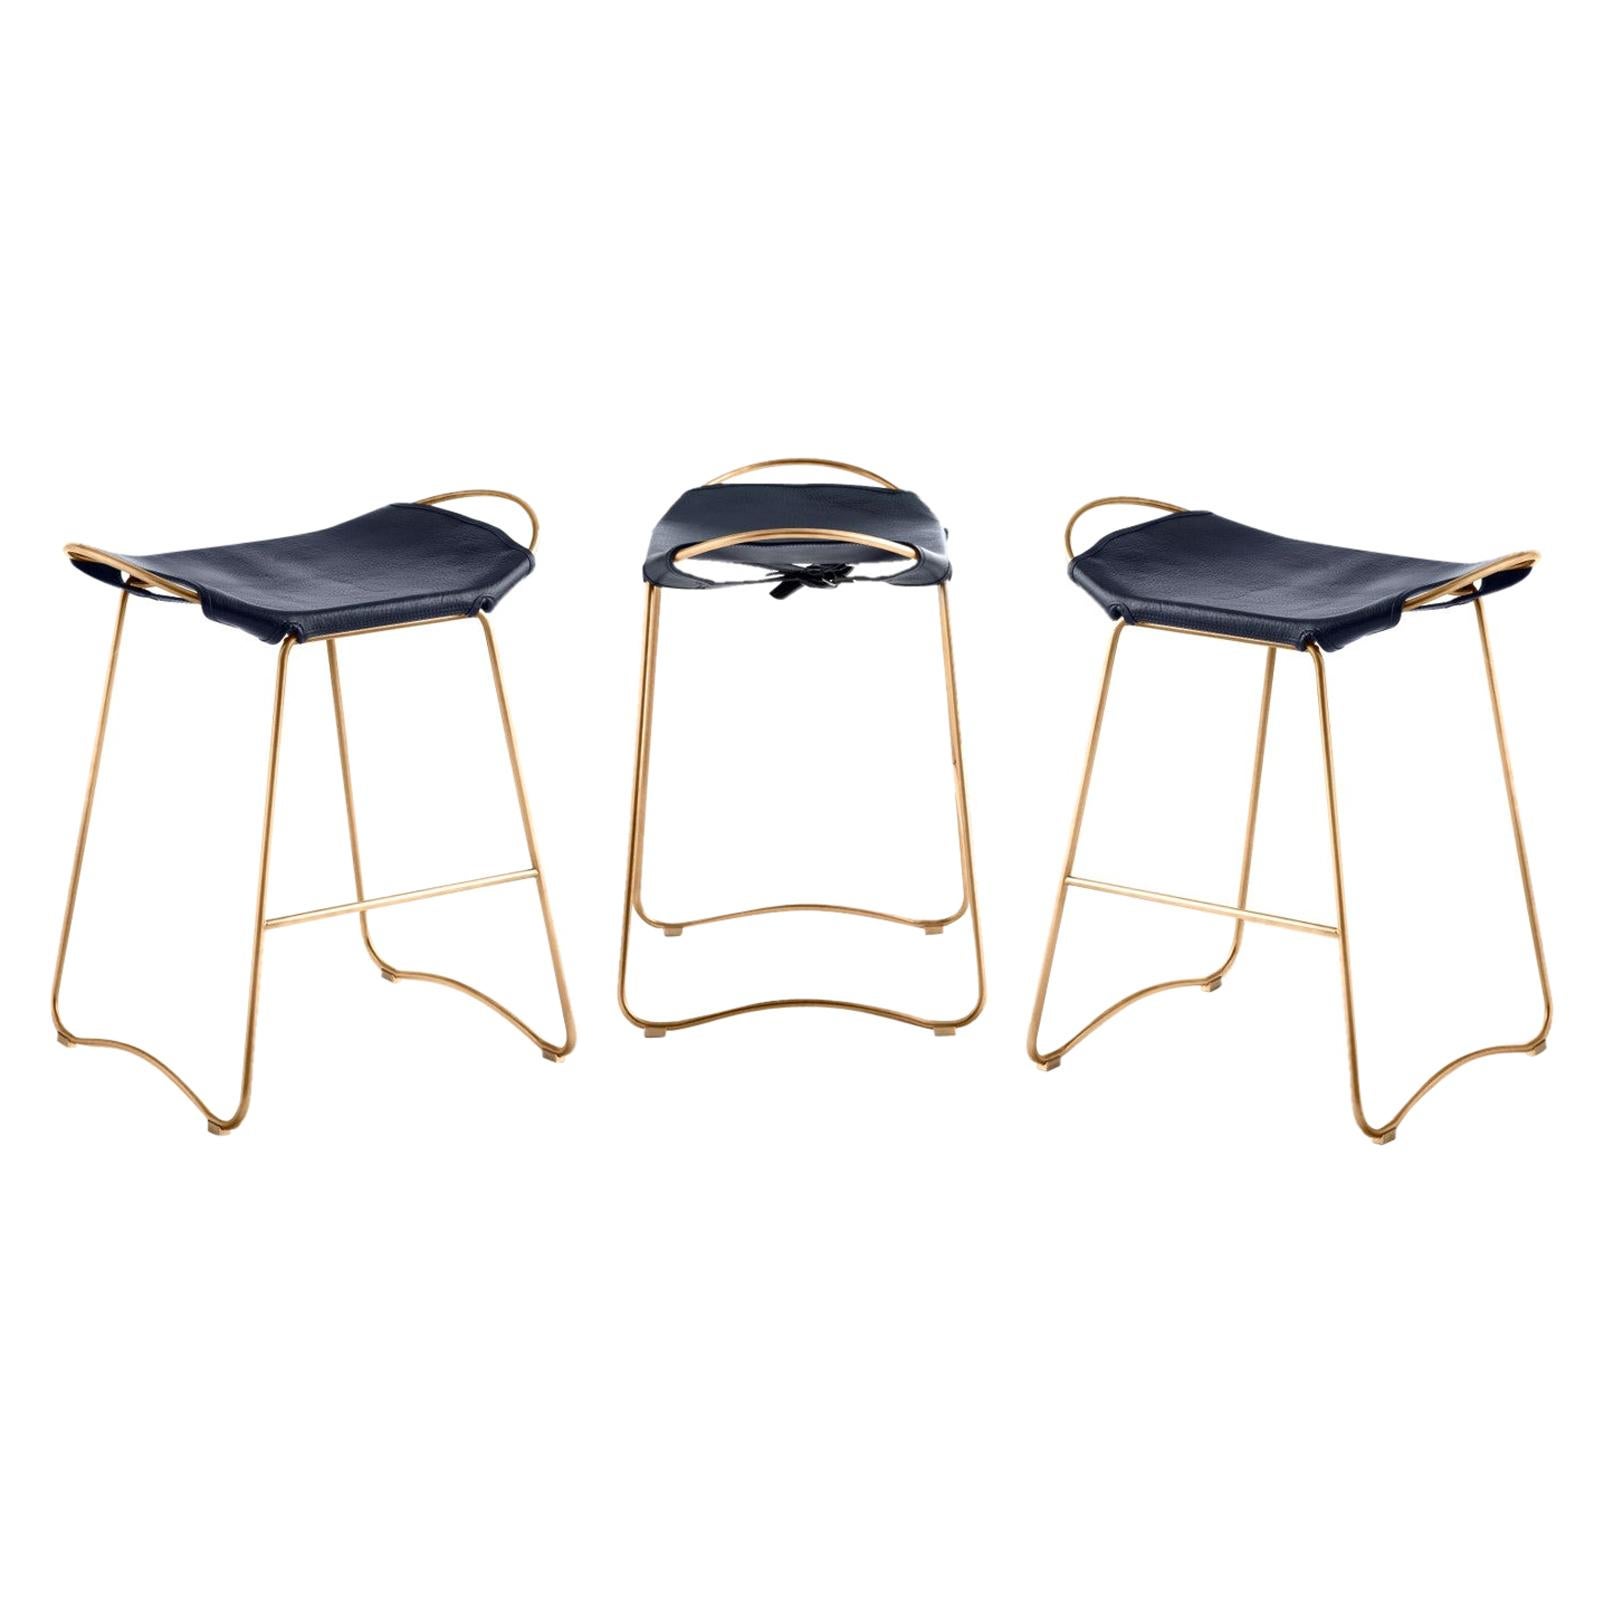 Set of 3 Contemporary Sculptural Bar Stool, Aged Brass Metal & Navy Blue Leather